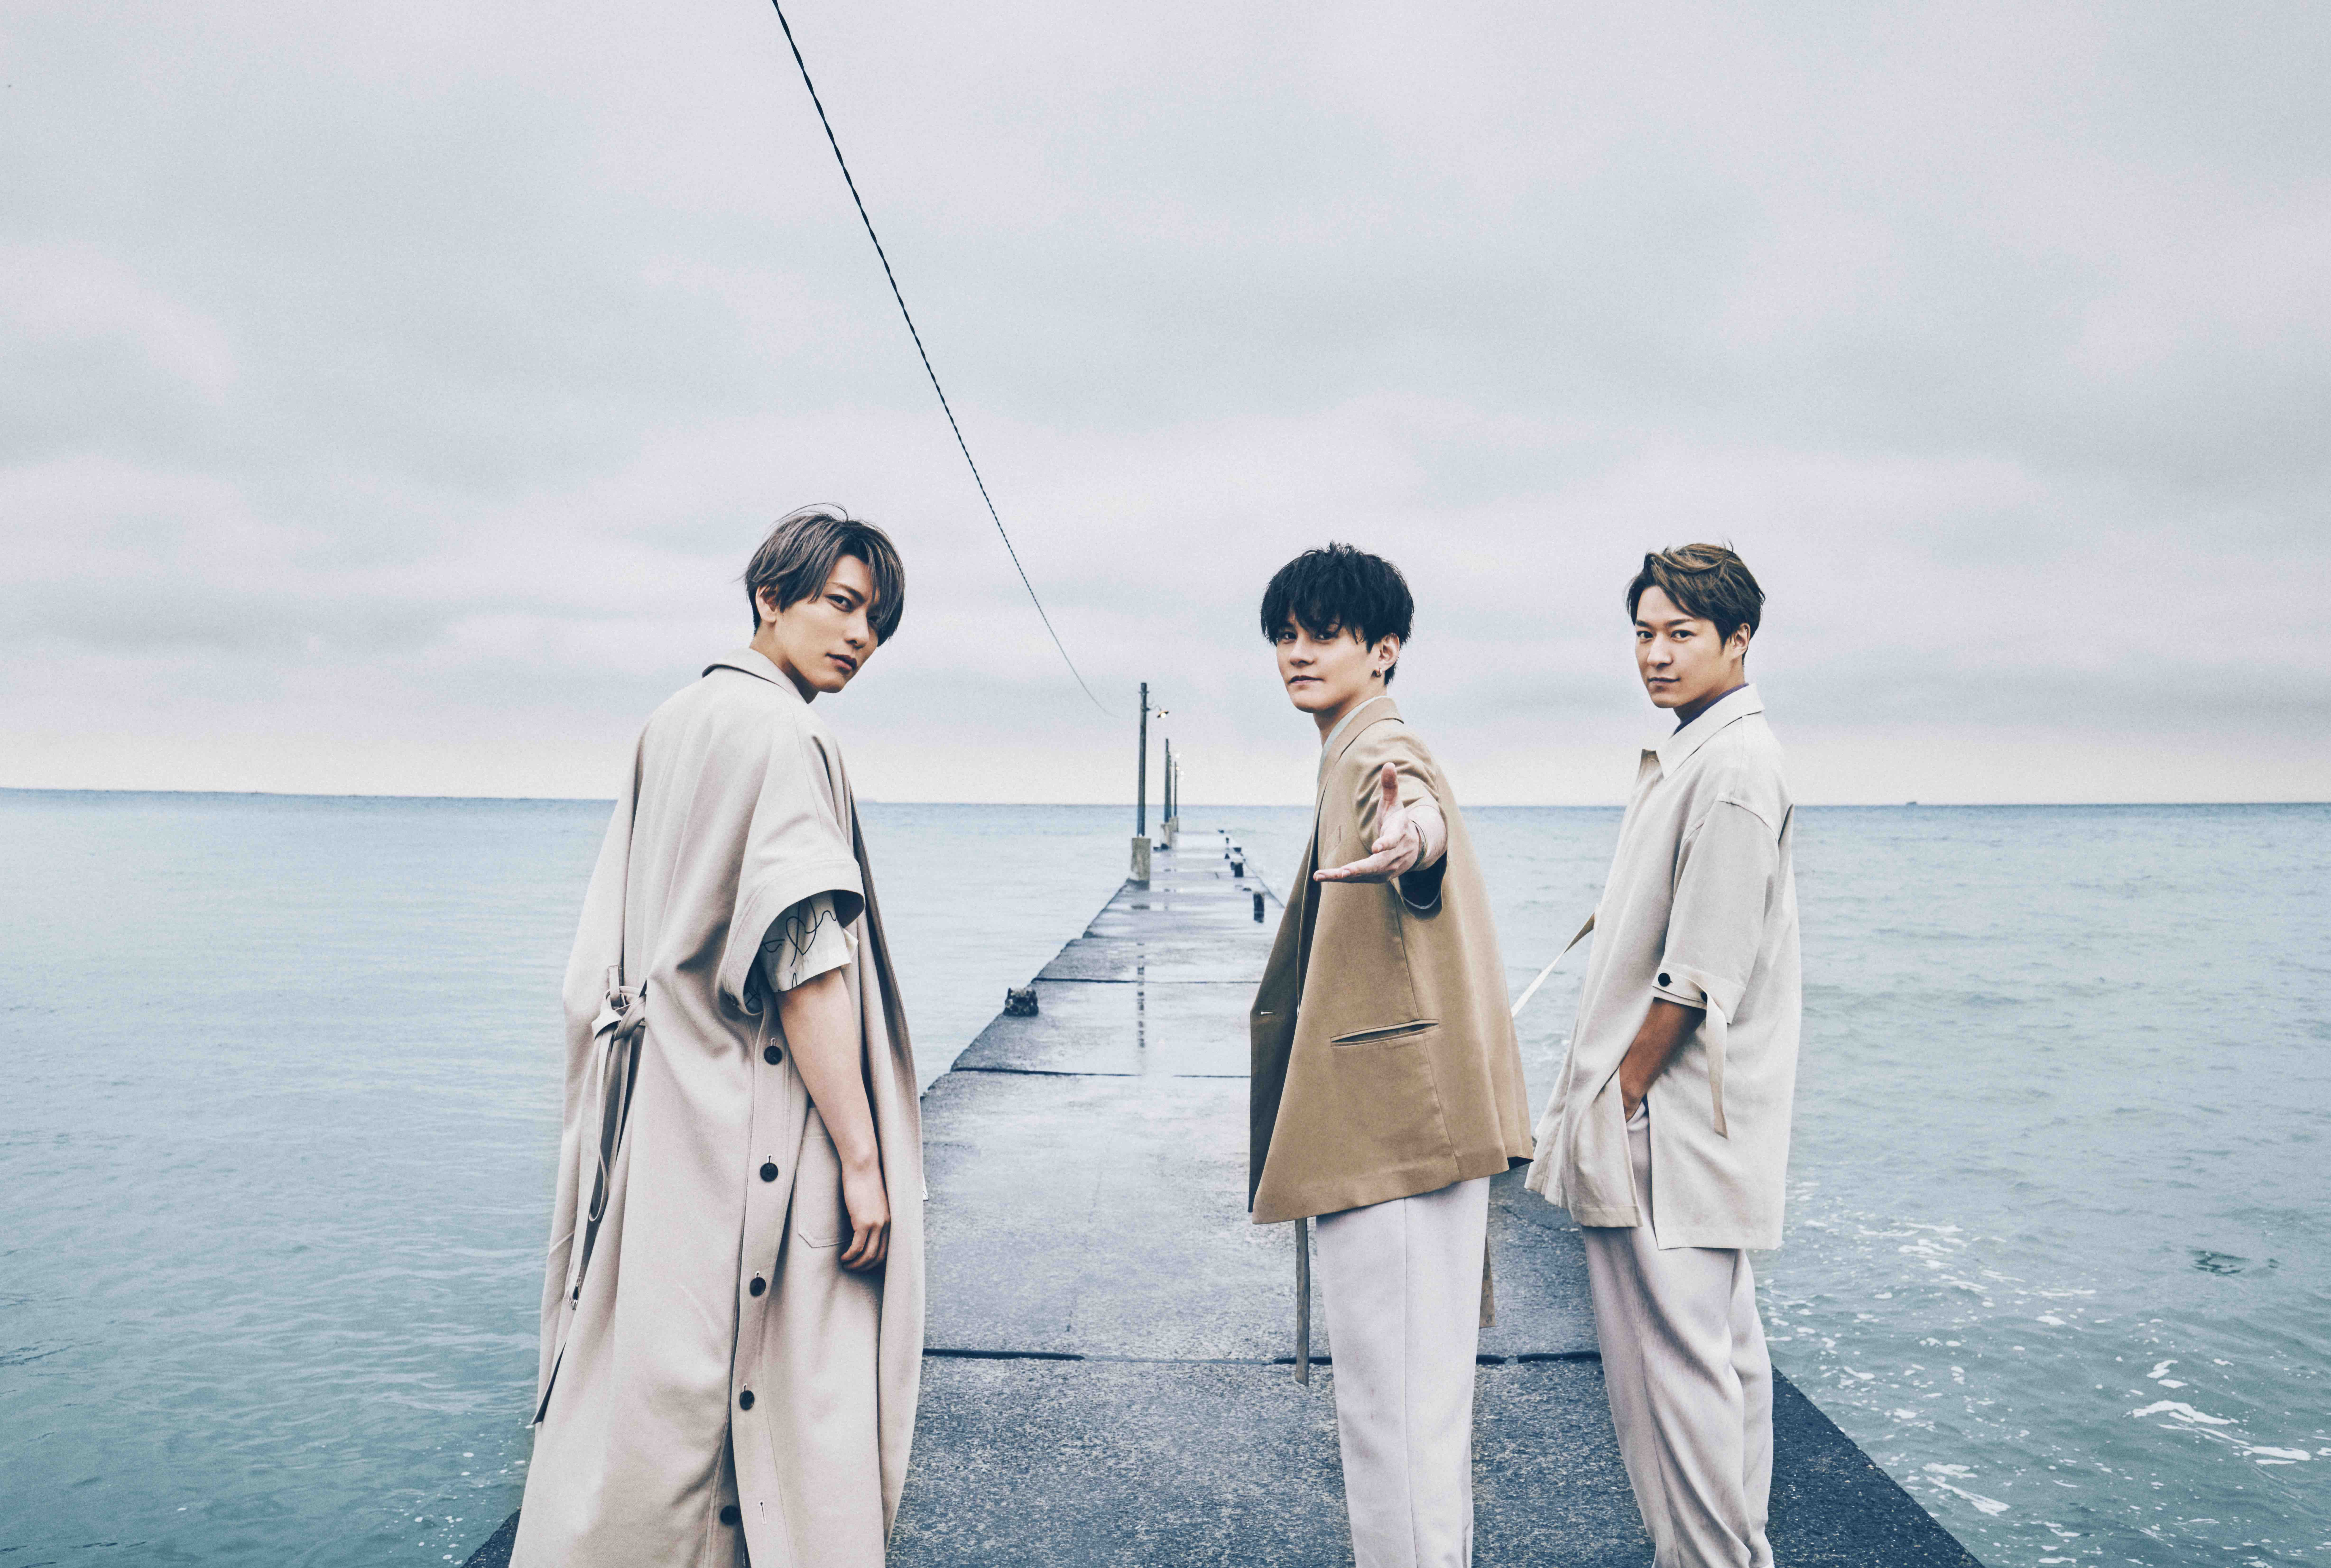 Lead the Best "Michishirube" Limited Edition (4CD+DVD) Release on July 31st,2022 No.4